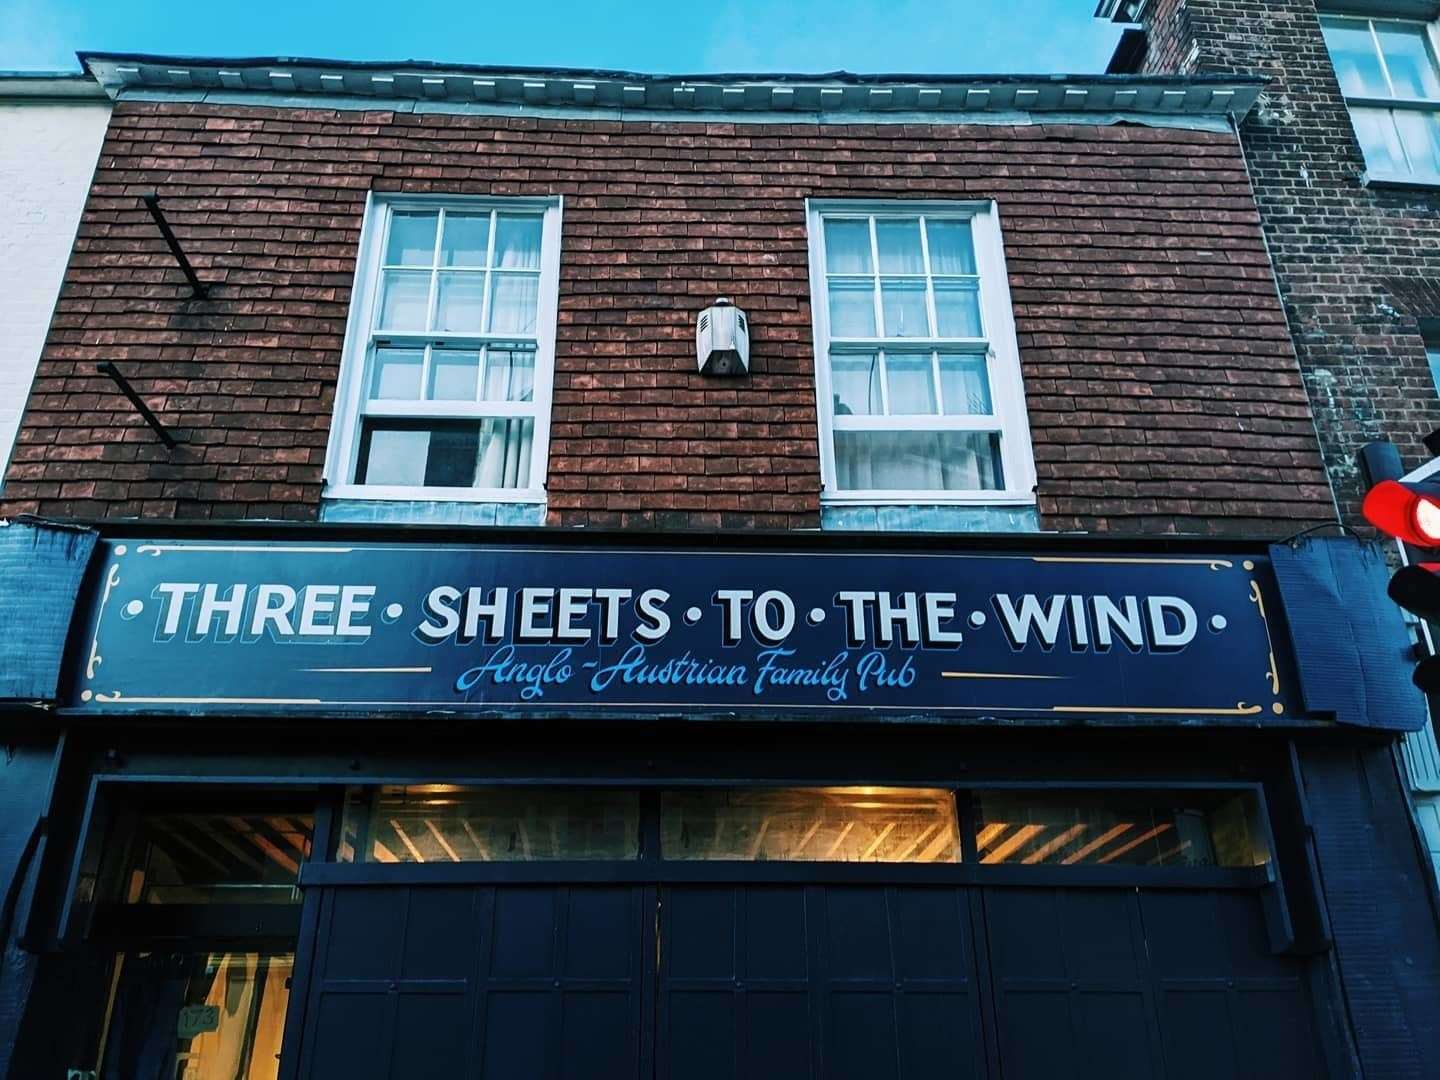 The Three Sheets To The Wind opened in April last year